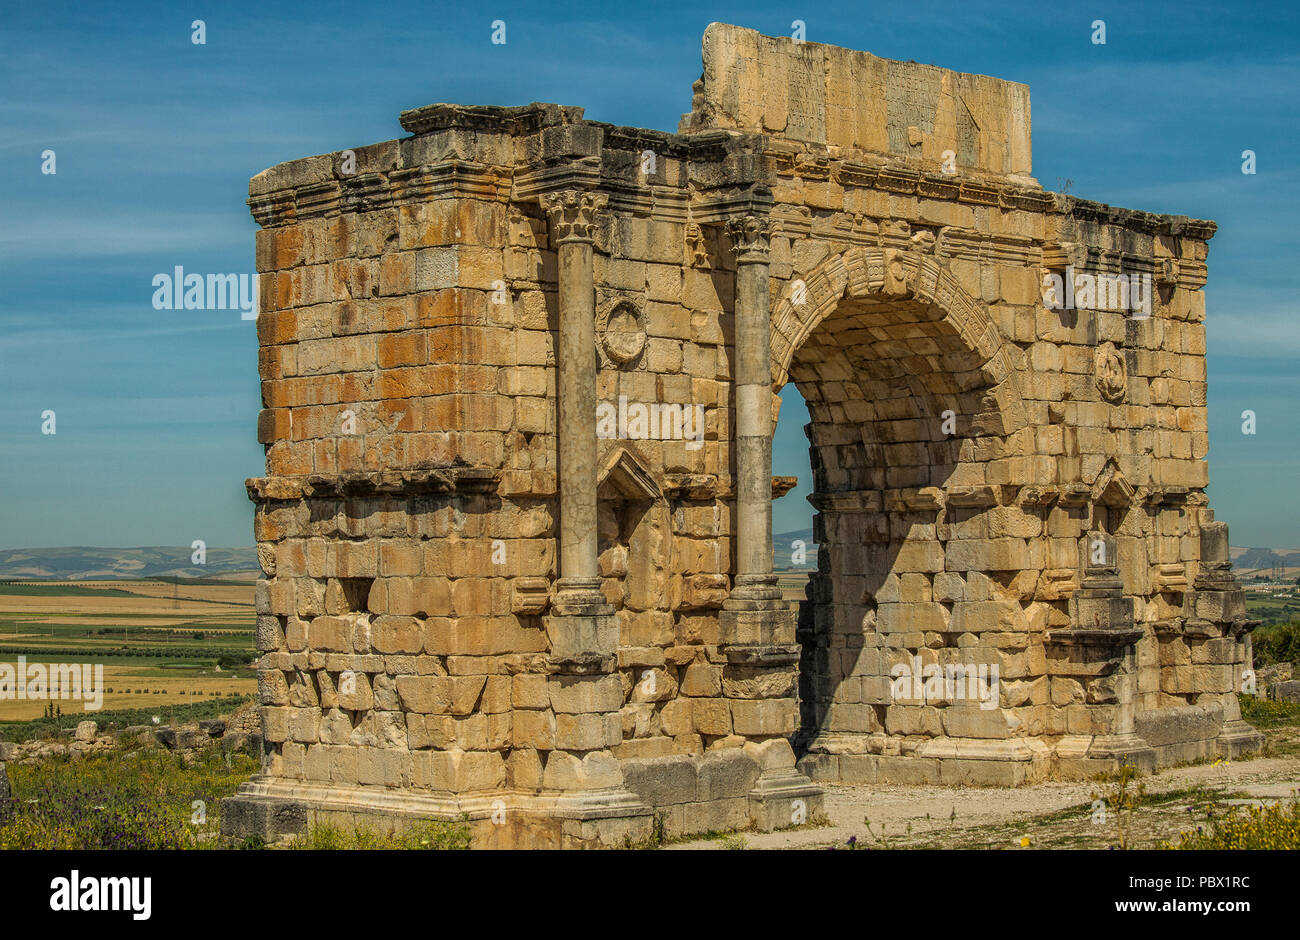 Triumphal Arch - North side of the Arch of Caracalla in Volubilis, Morocco. Built in 217 AD, The Arch of Caracalla was built in honor of the Roman Emp Stock Photo